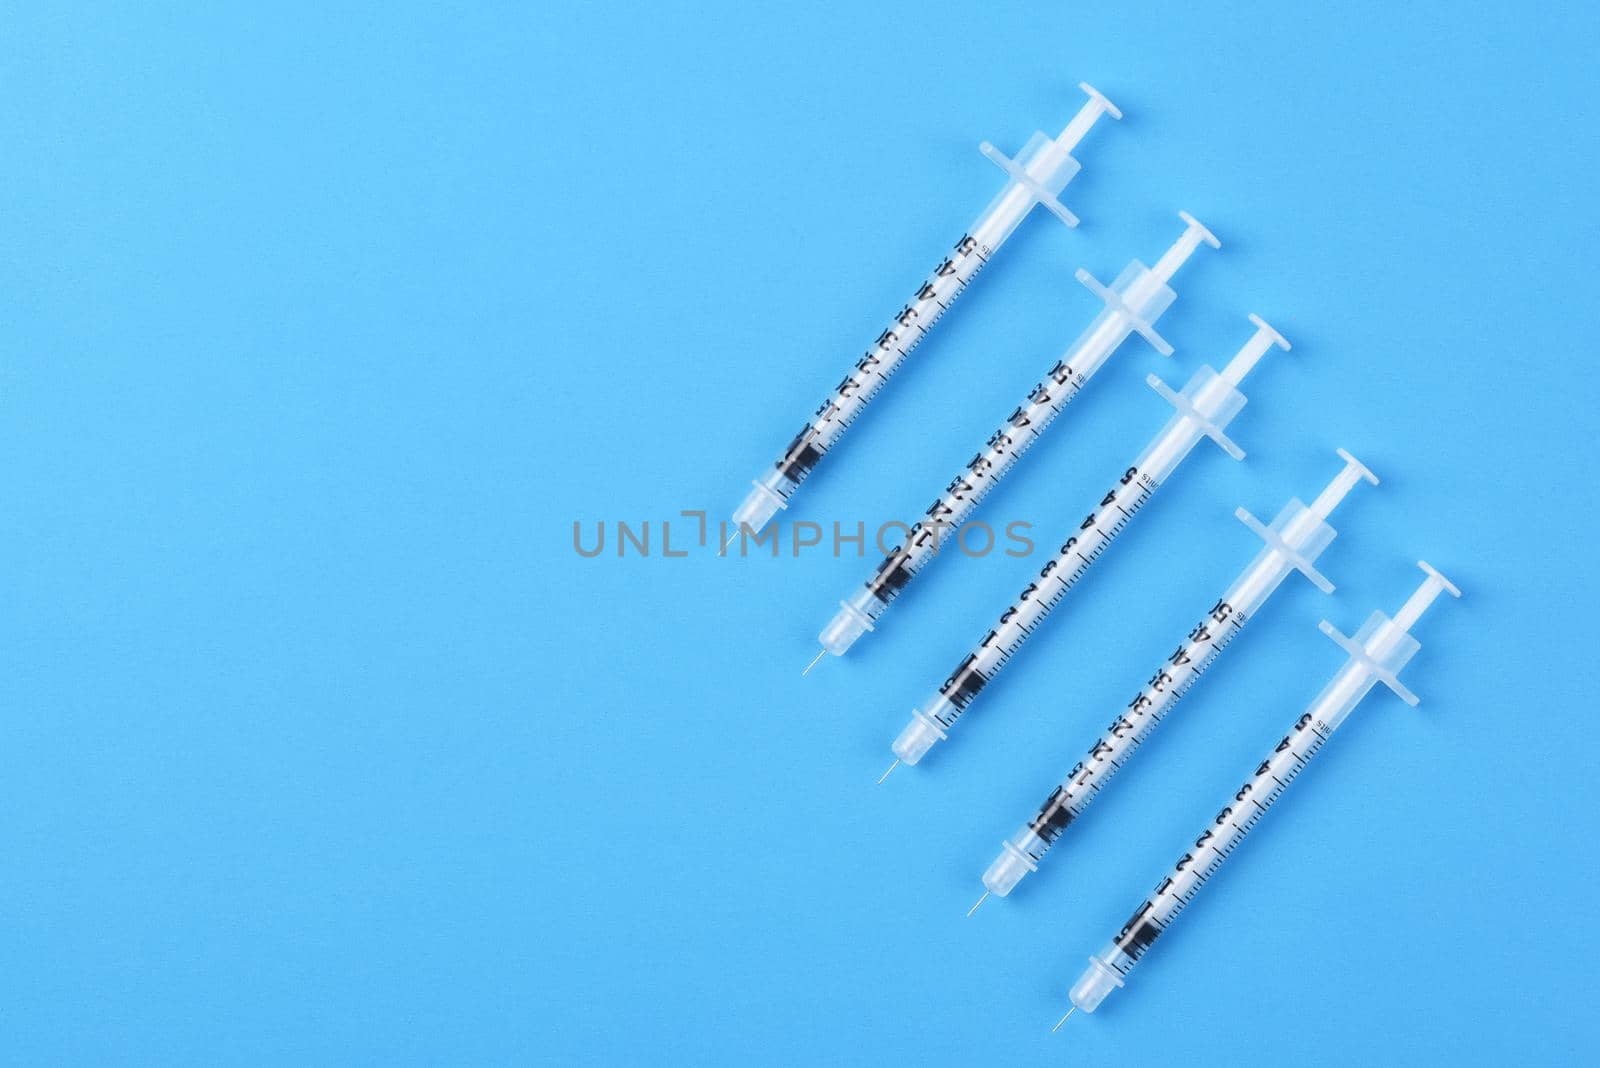 Five new syringes on a blue background with copy space. by sCukrov